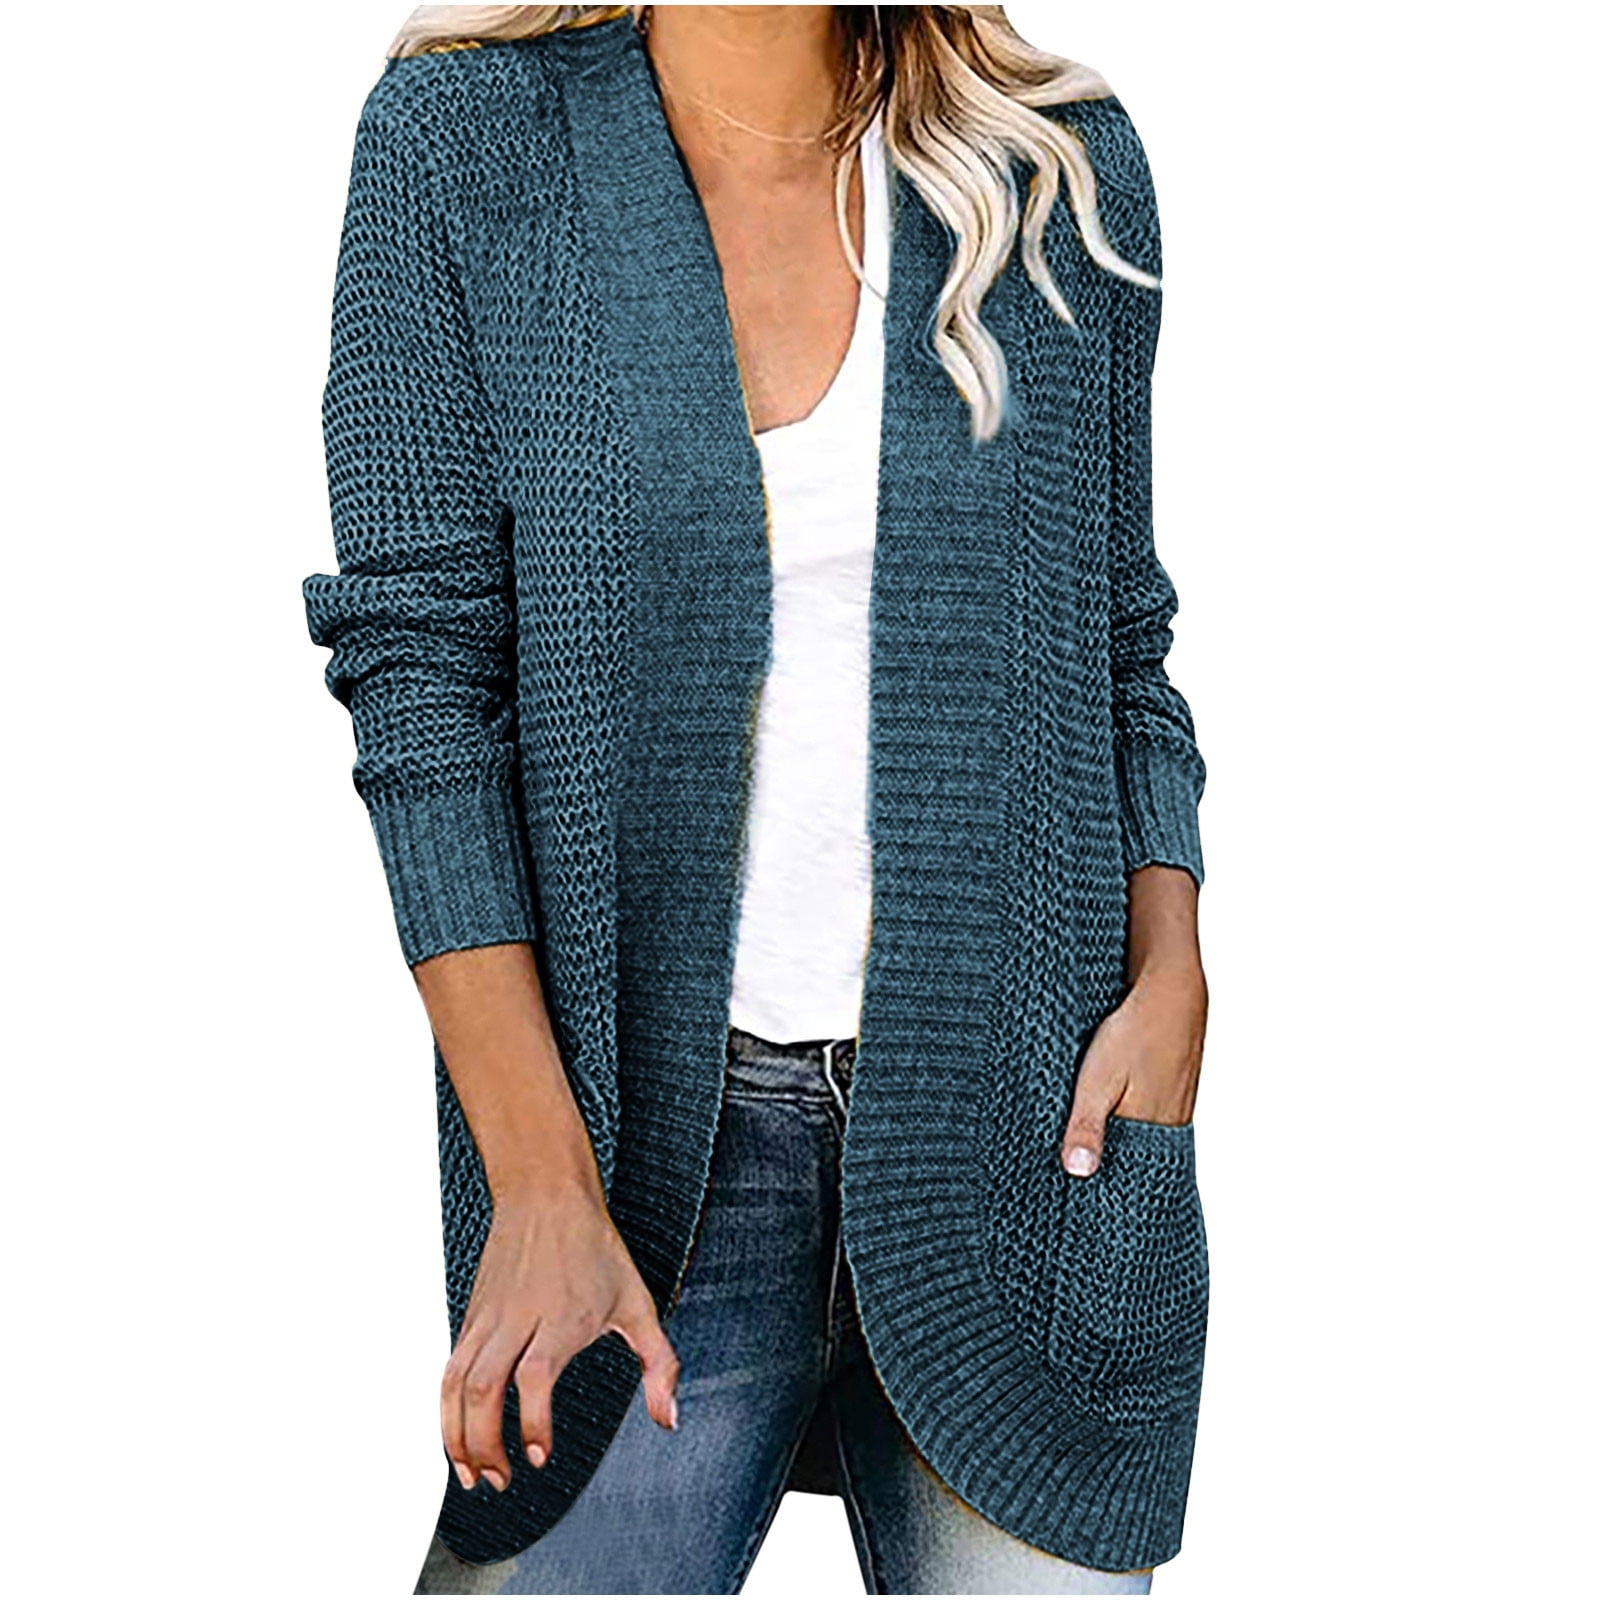 Olyvenn Autumn And Winter Women's Casual Solid Long Cardigan Outwear Casual  Tops Jacket Sweaters With Pocket Curved Hem Open Front Knit Sweater  Cardigans Blue 10 